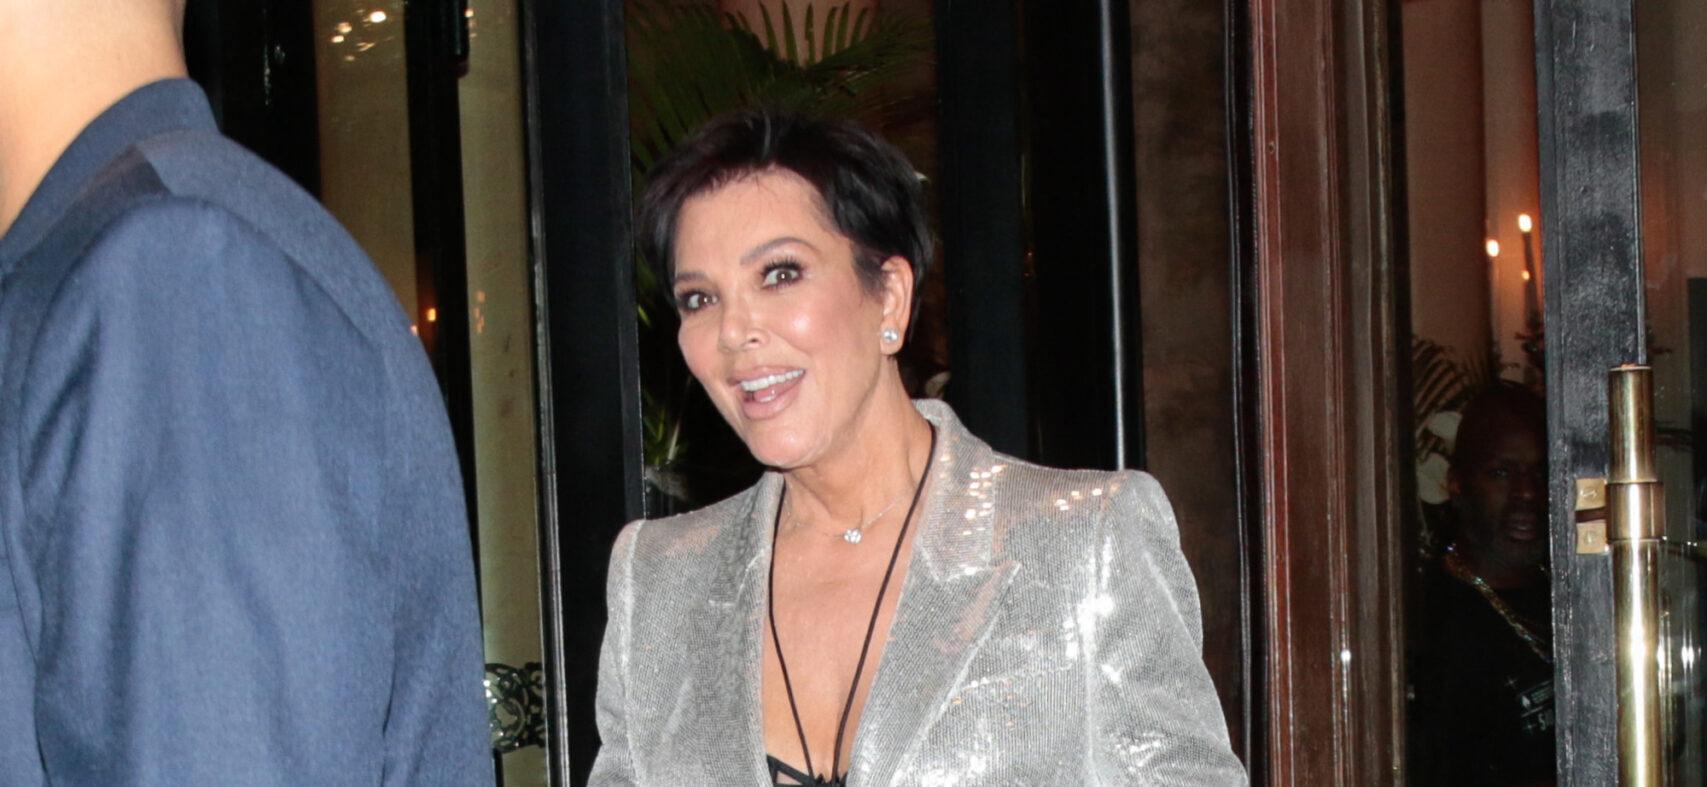 Kris Jenner Looks To Kick Chronic Diseases In The Butt With Proactive ‘Prenuvo’ MRI Scan!